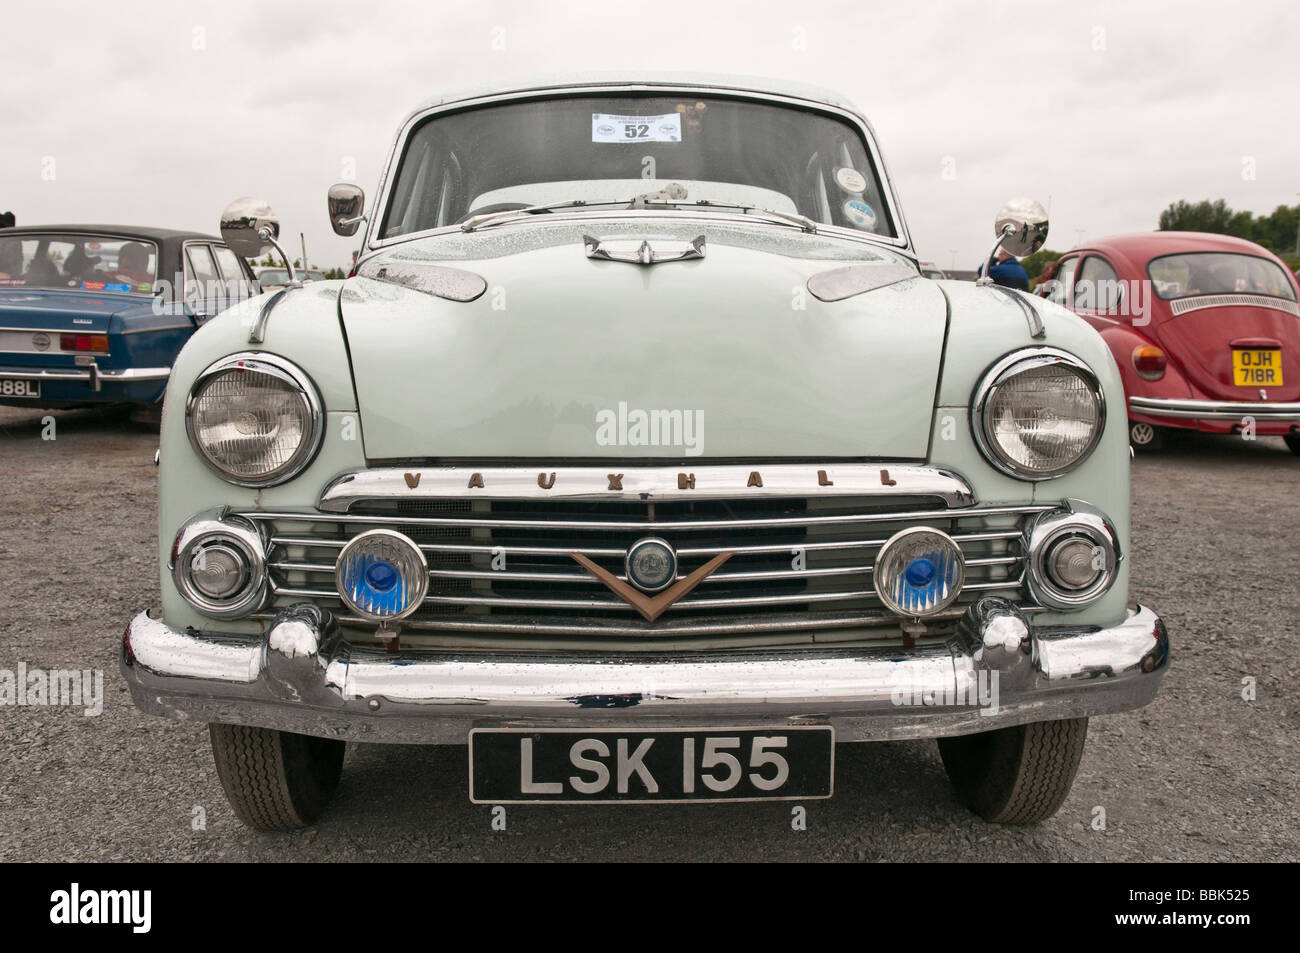 Vauxhall Cresta E, manufactured between 1954 and 1957 Stock Photo